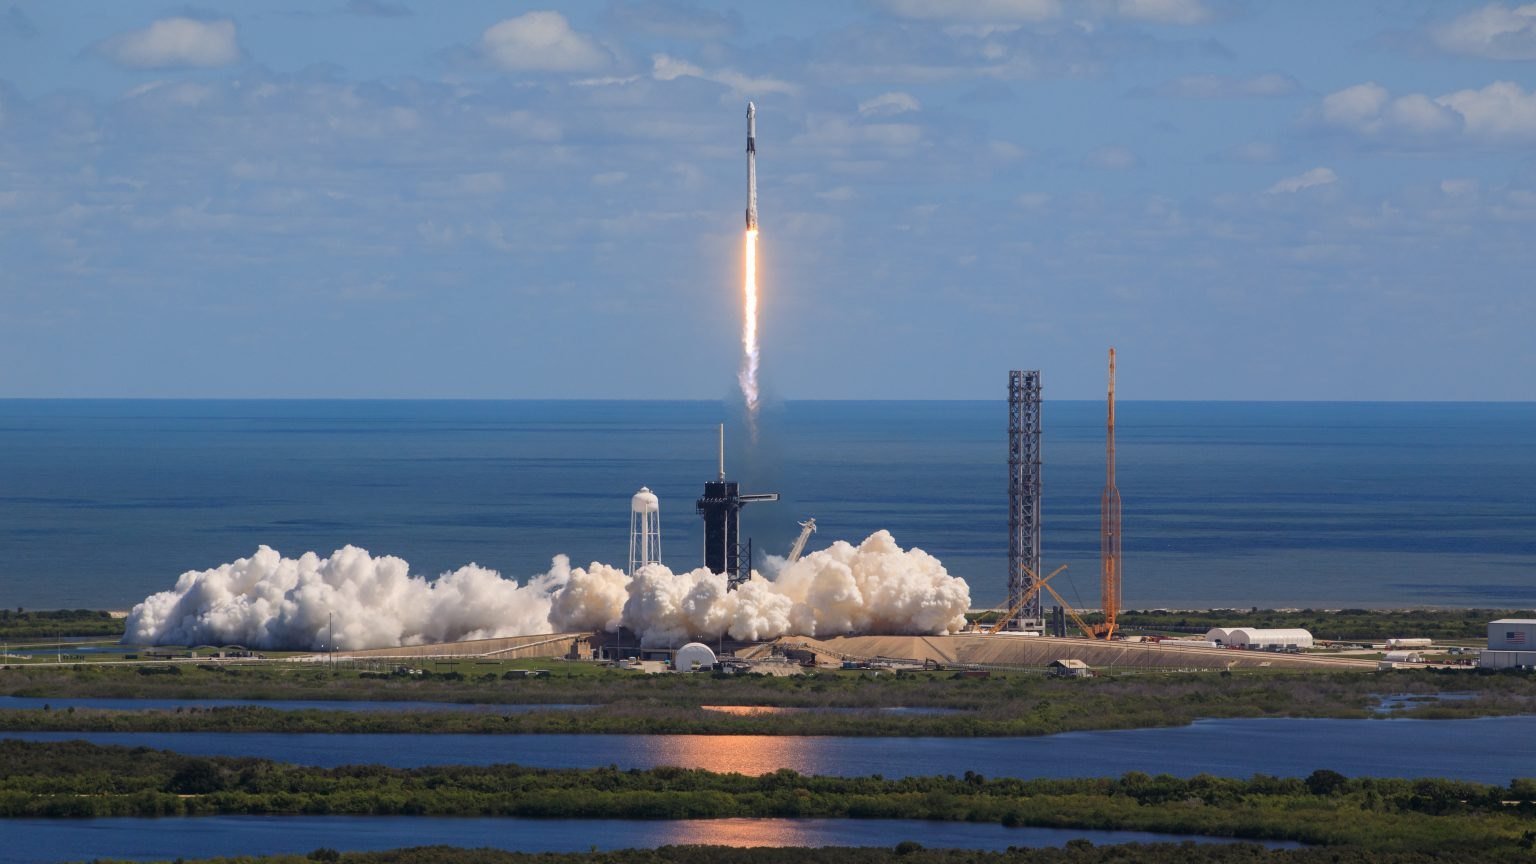 SpaceX's Falcon 9 rocket and Dragon spacecraft, named Endurance, lift off from Launch Pad 39A at Kennedy Space Center in Florida, U.S., for the Crew-5 mission to the International Space Station, October 5, 2022. /NASA